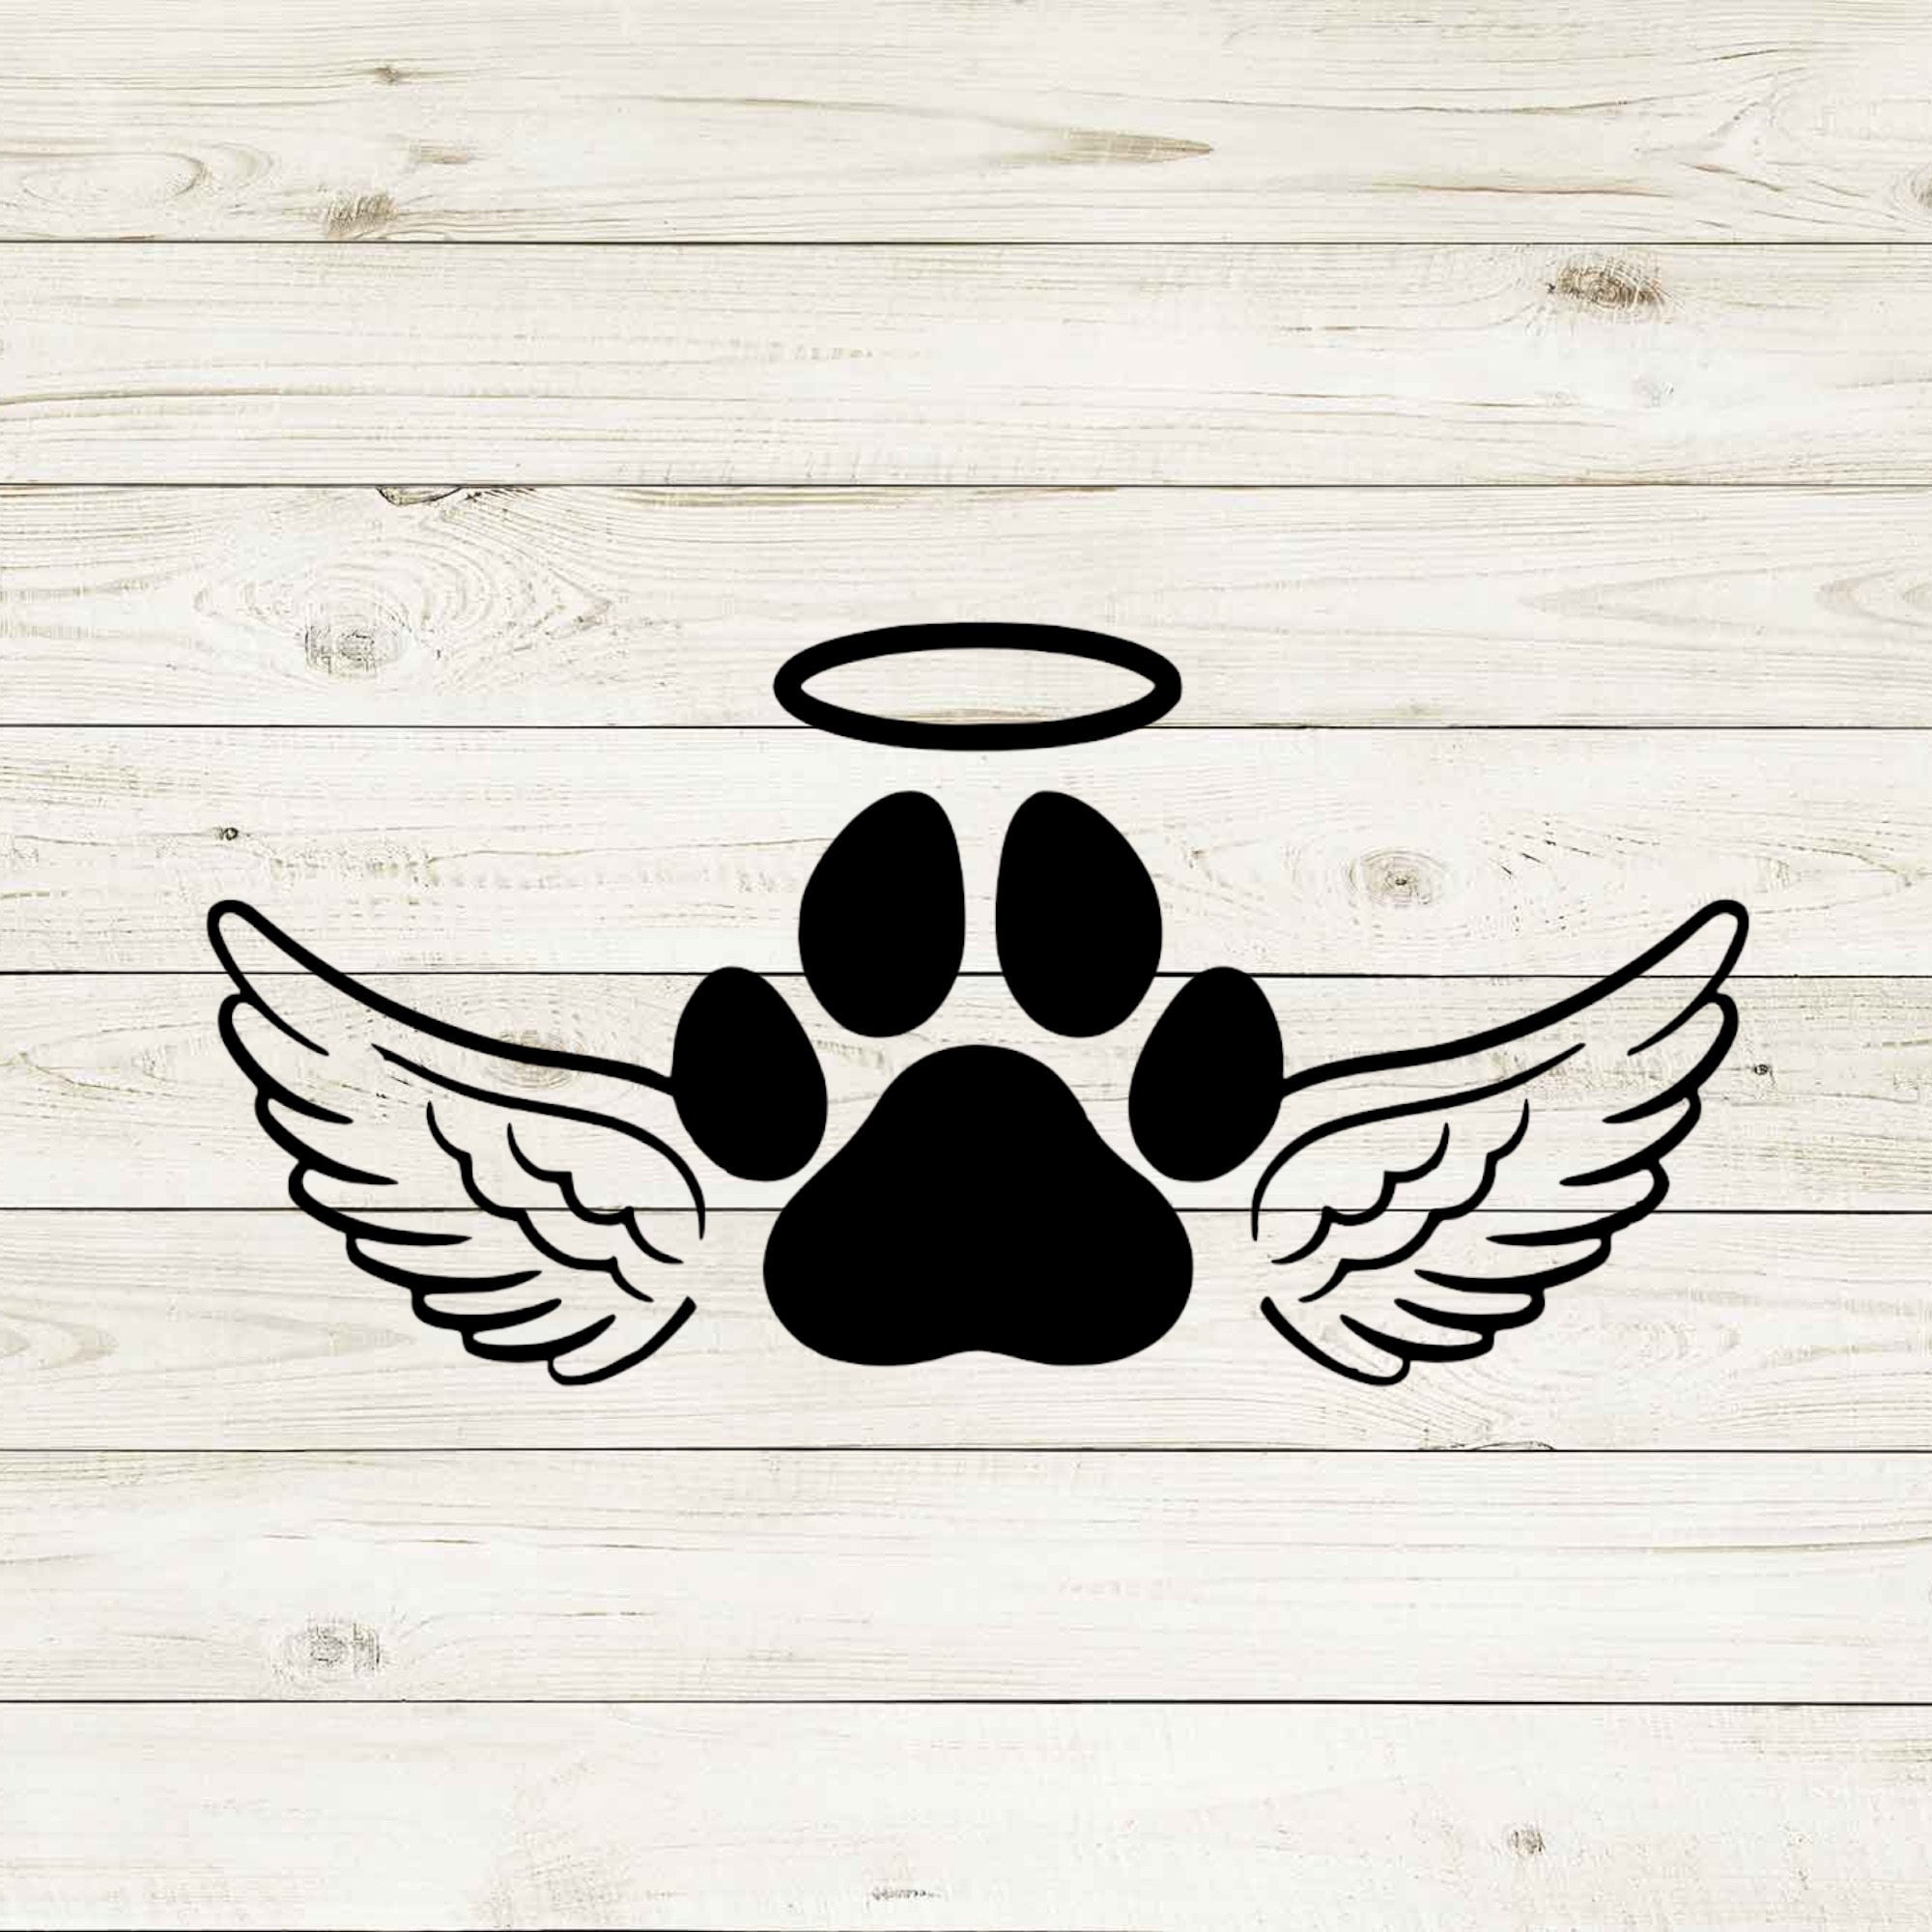 Paw Print With Wings Svg | sites.unimi.it